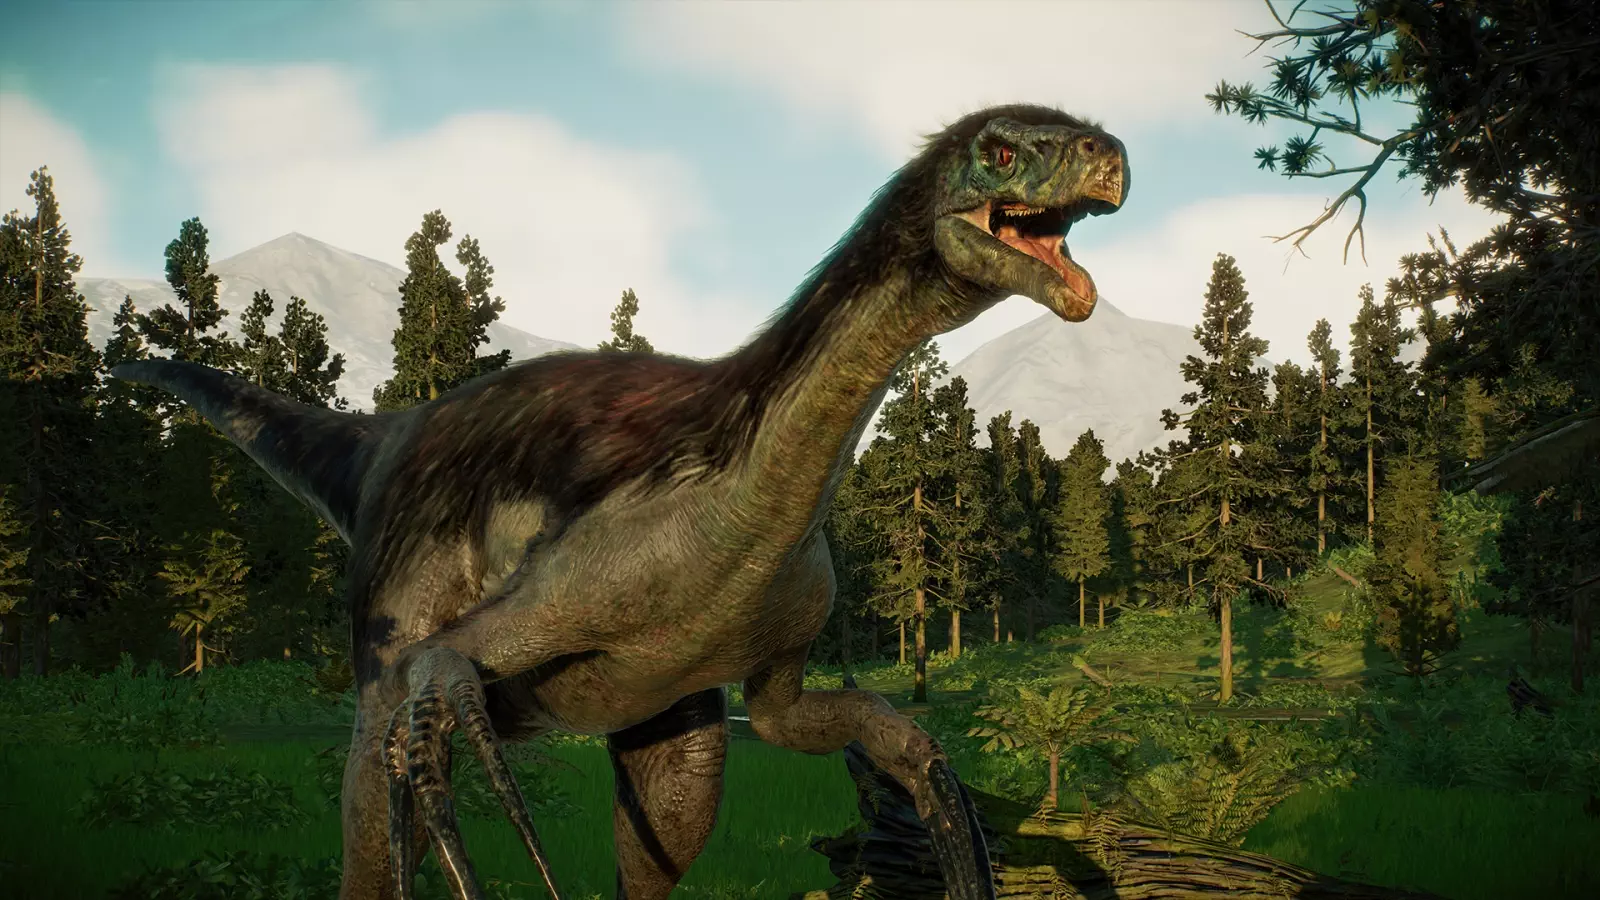 Steam's latest free game is a glorious dinosaur survival horror